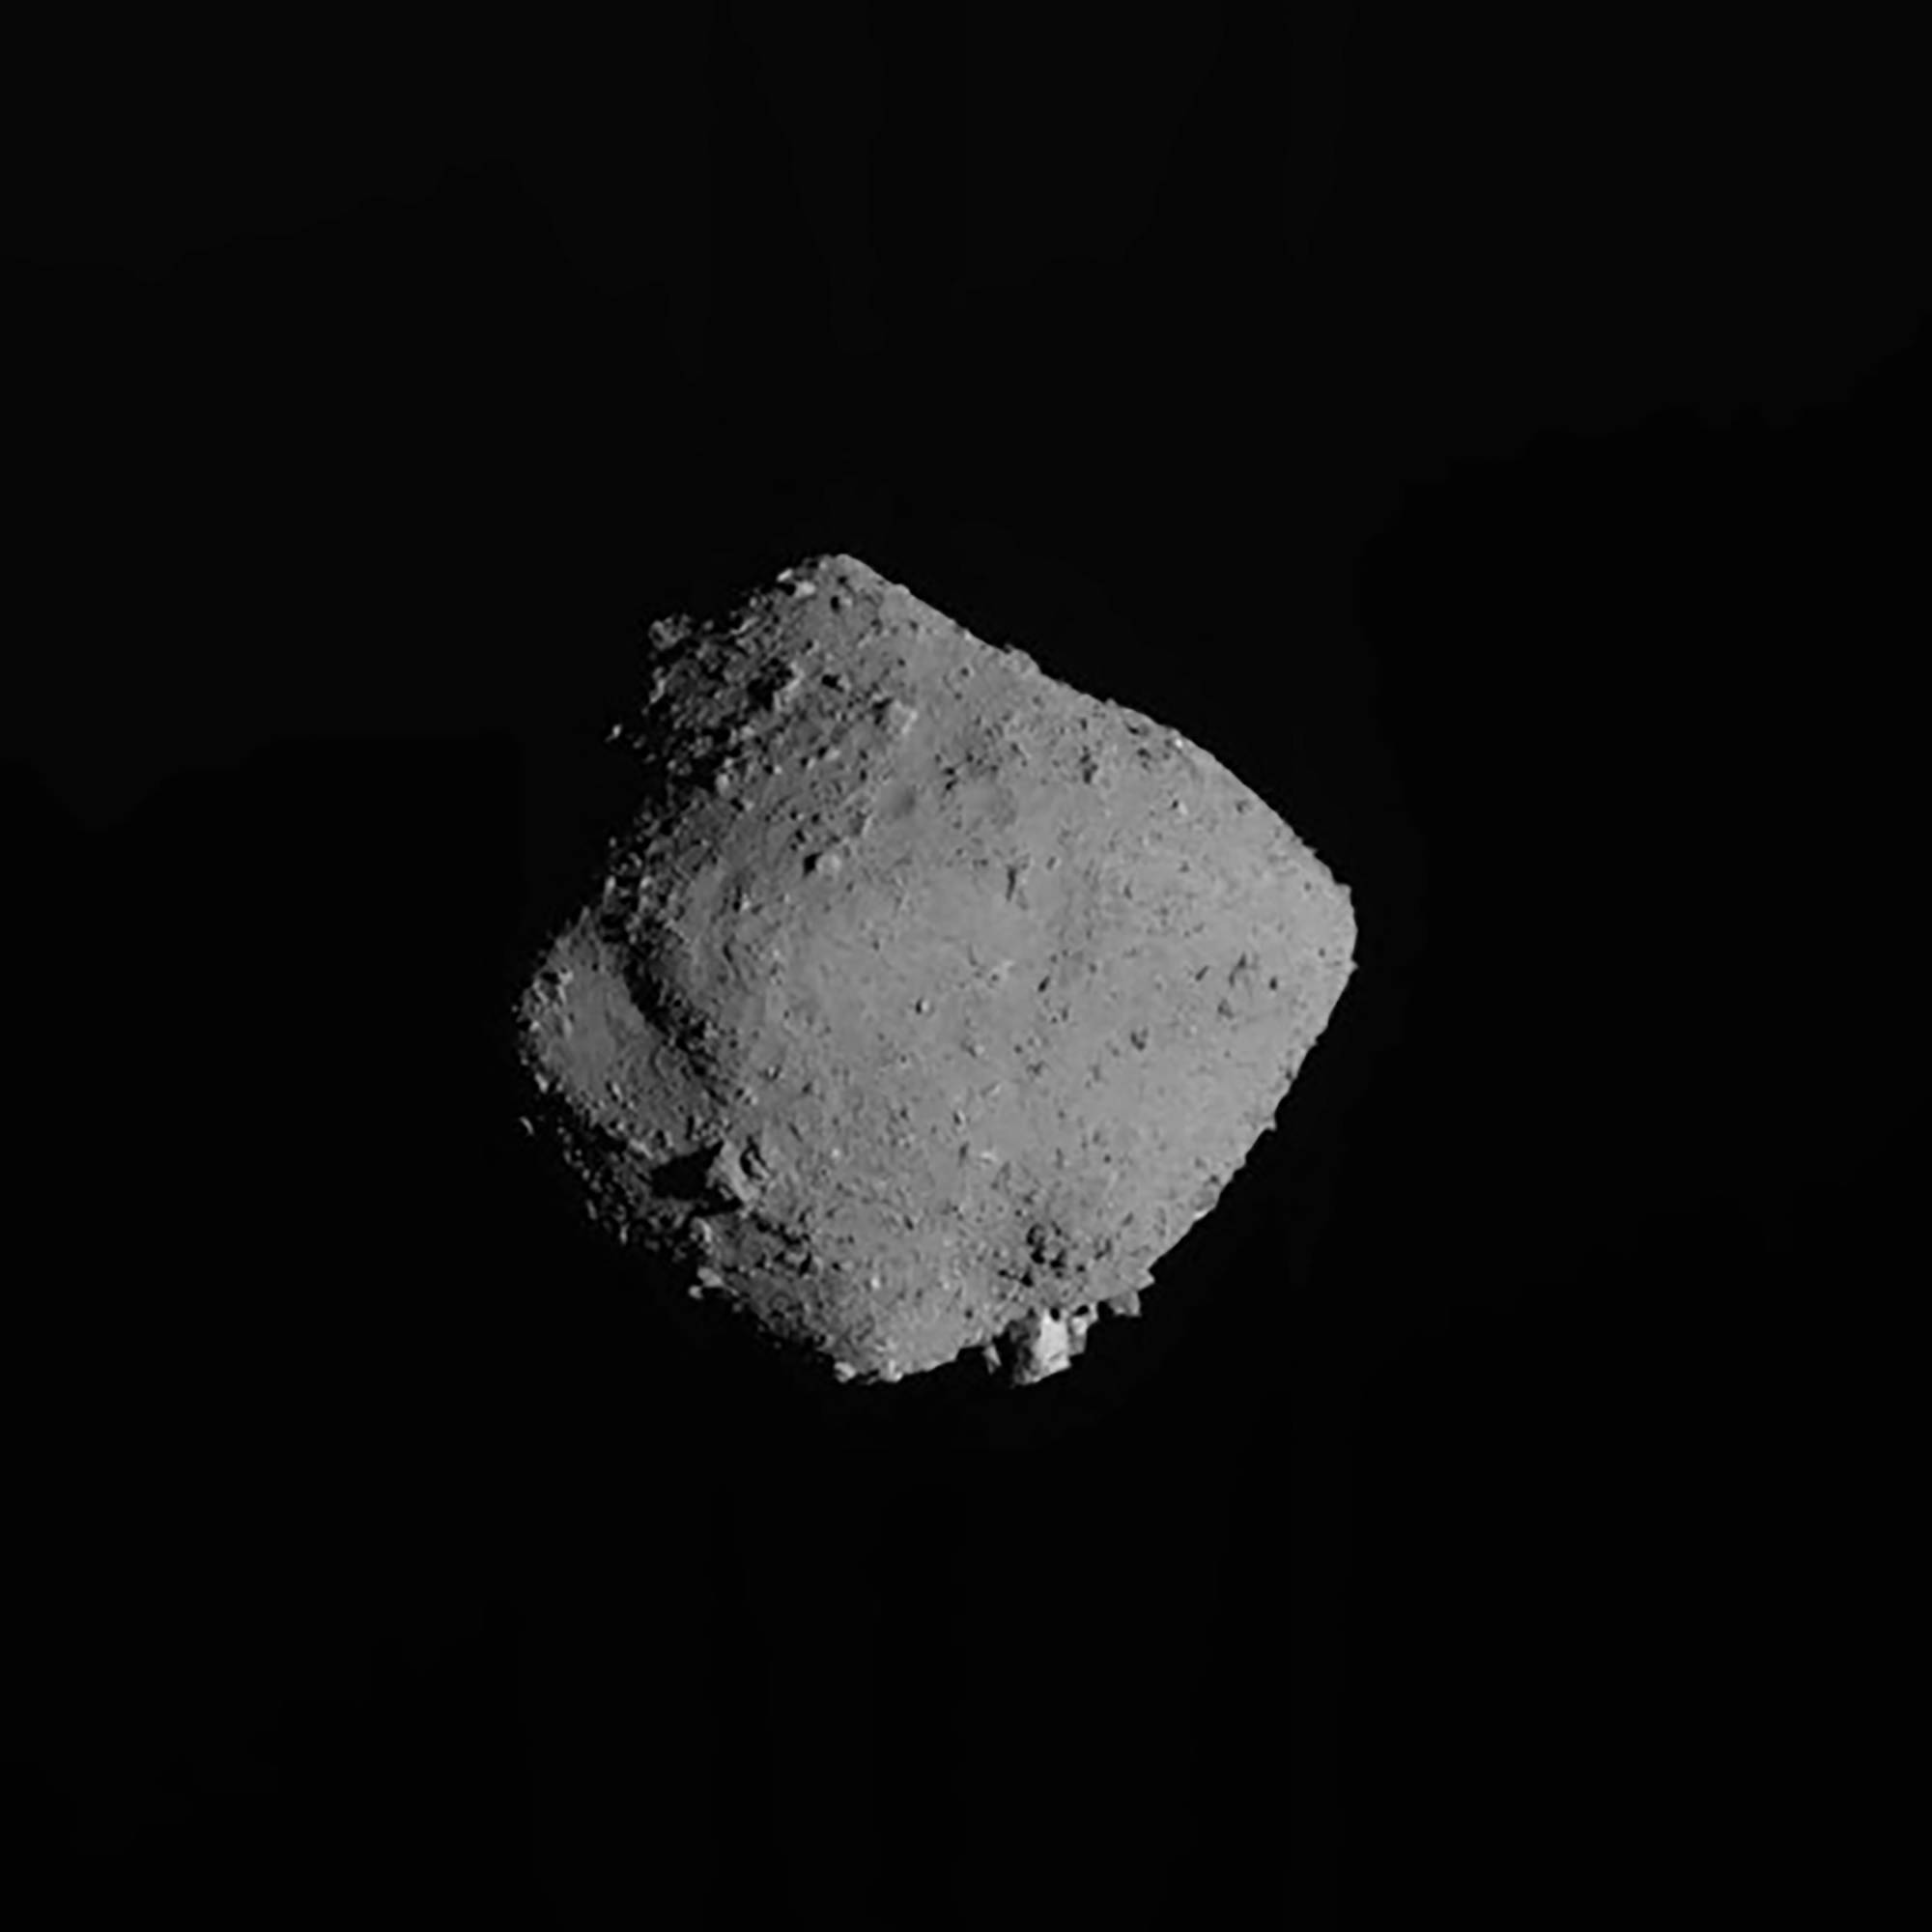 The asteroid Ryugu taken by its Hayabusa2 spacecraft. The spacecraft spent six years at a cost of $157 million to recover a single gram of material from the asteroid and return it to Earth recently. | AXA / VIA AP